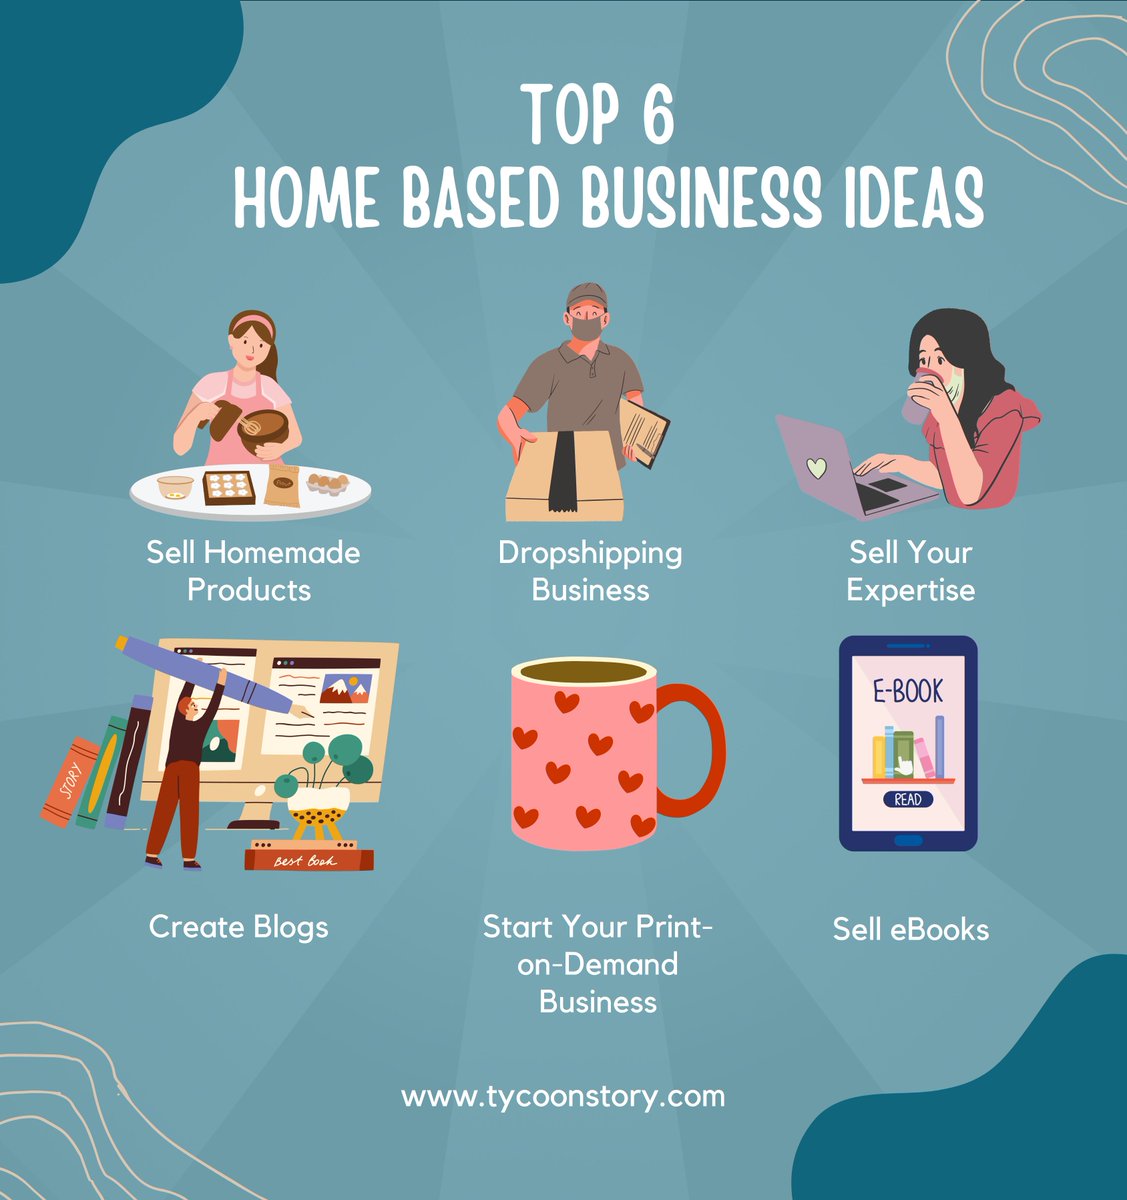 Top 6 Home Based Business Ideas 

#homebasedbusiness #freelancewriting #virtualassistance #onlinetutoring #ecommercetips #consulting #coachingtips #bakerybusiness #cateringjobs #entrepreneurship #workfromhome #flexibility #SuccessOpportunity